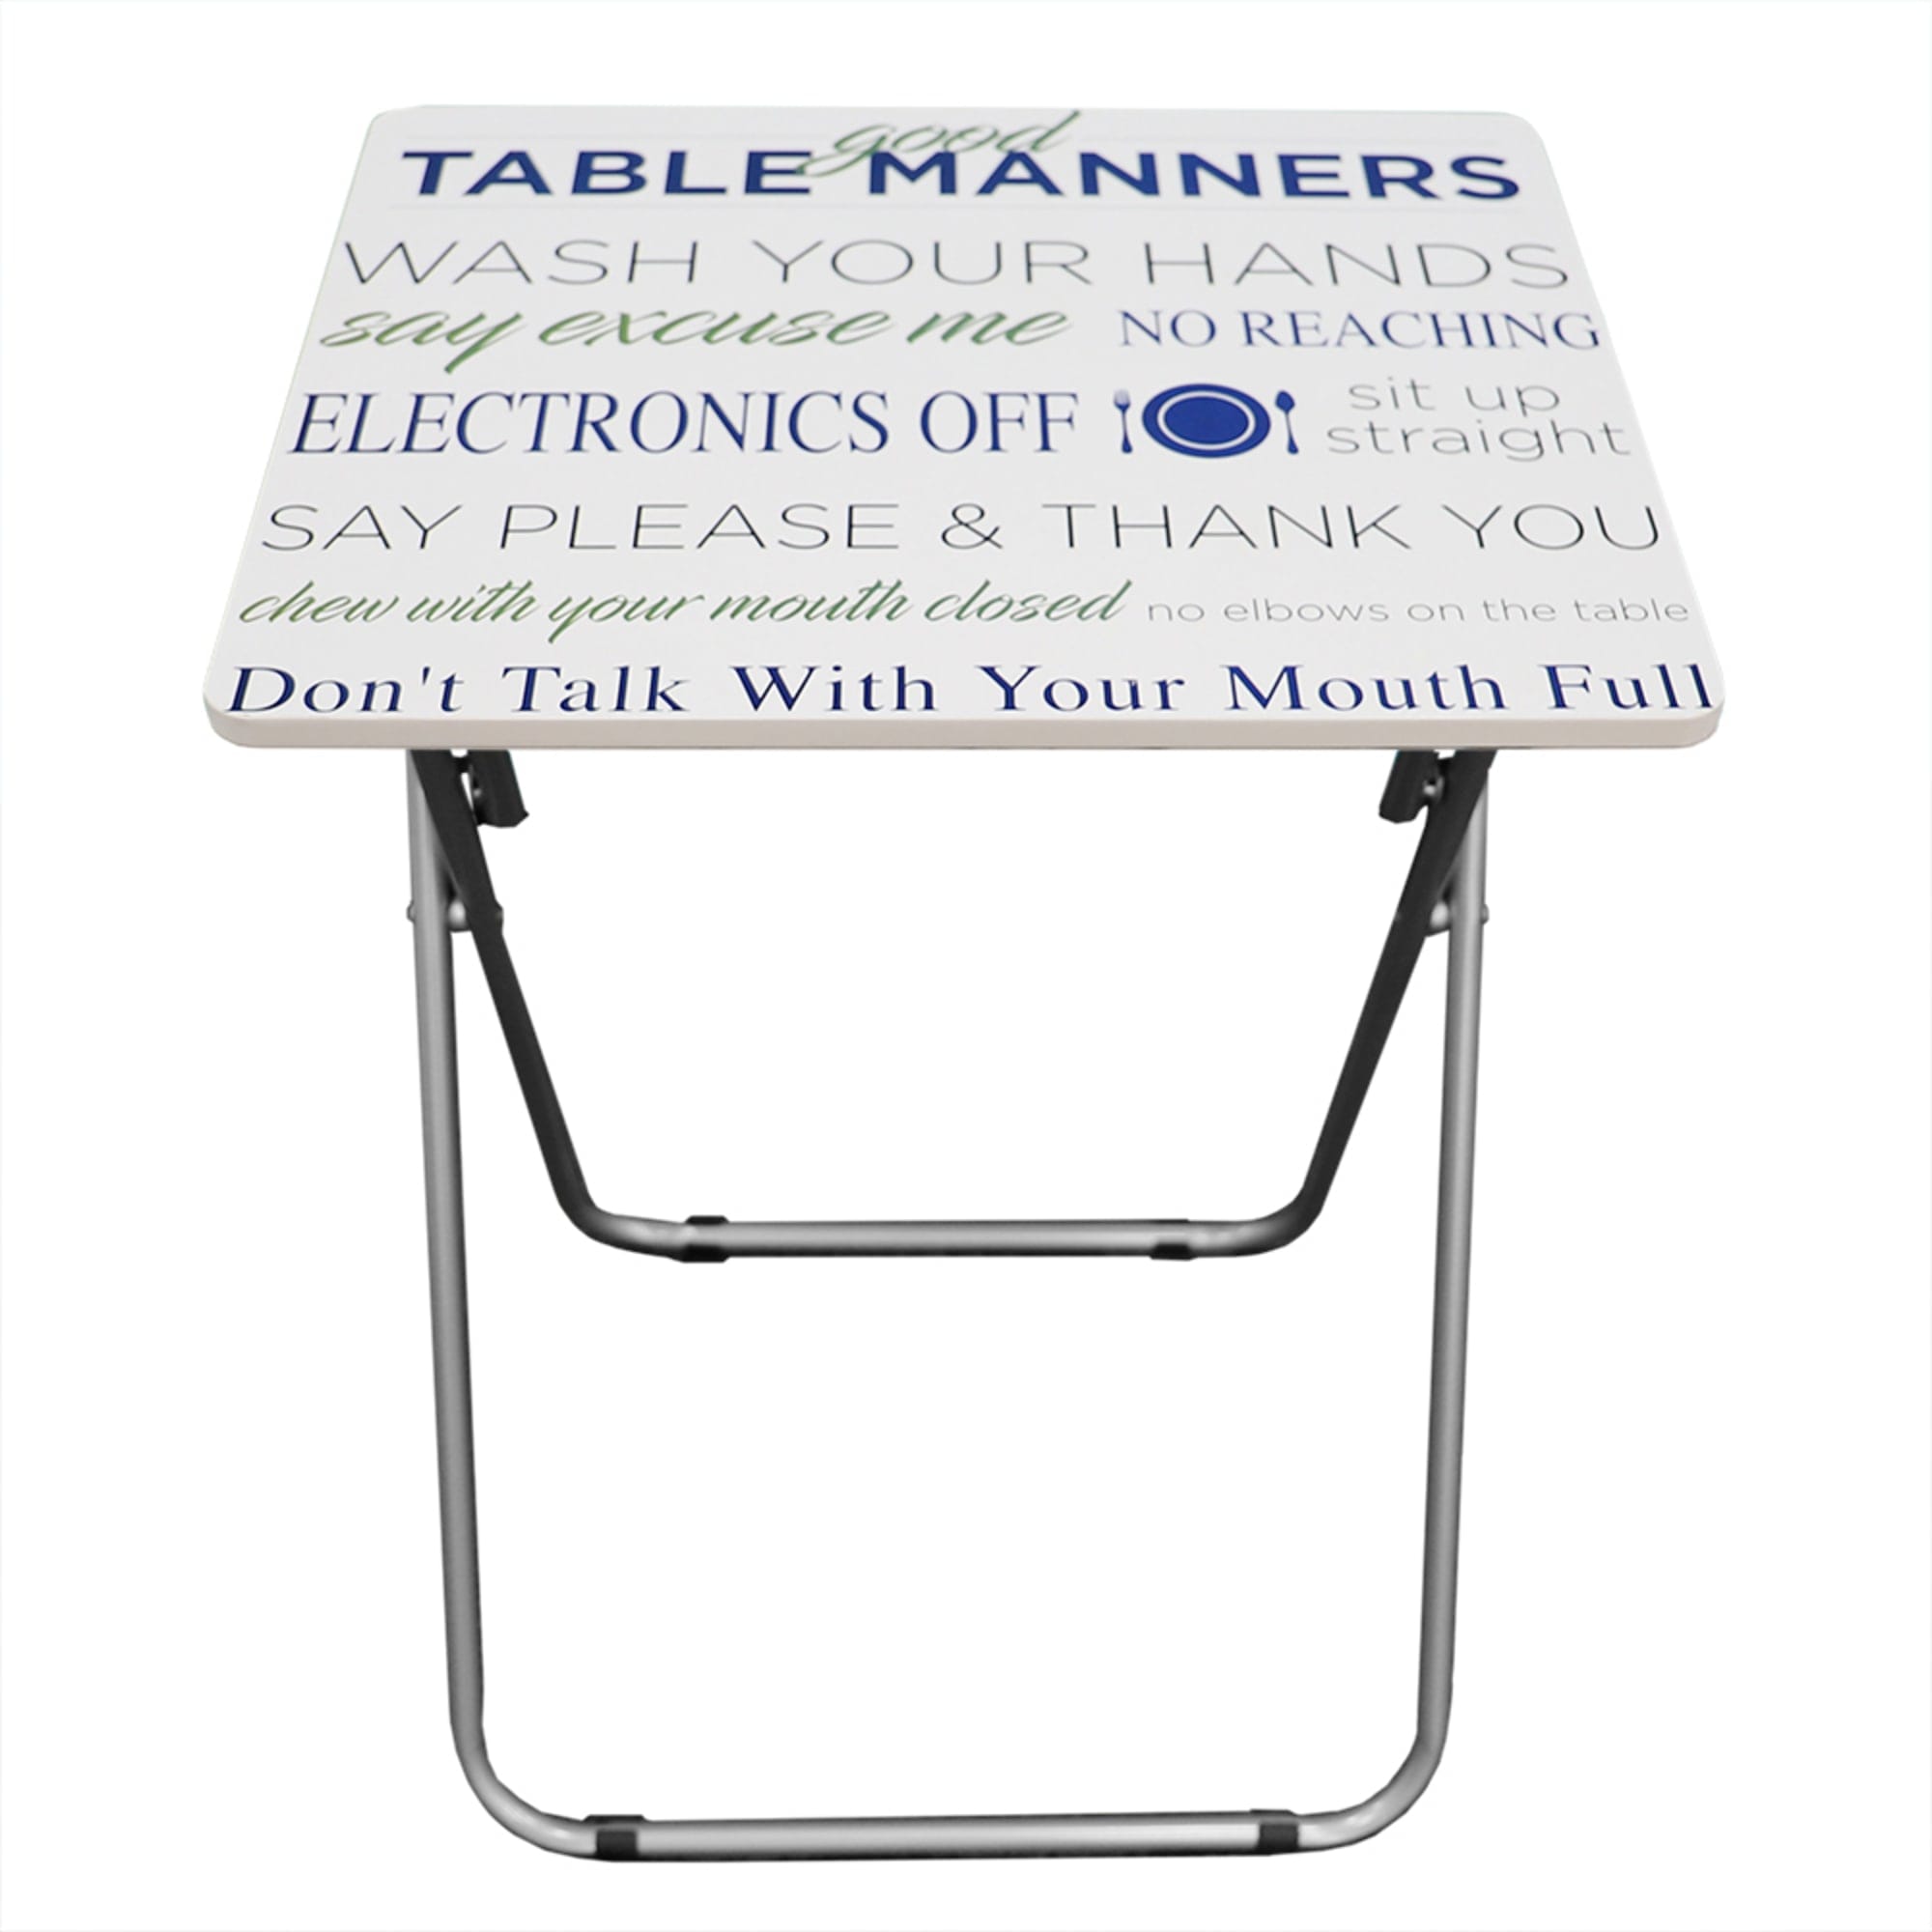 Home Basics Mind your Manners Multi-Purpose Foldable TV Tray Table, White $15.00 EACH, CASE PACK OF 6